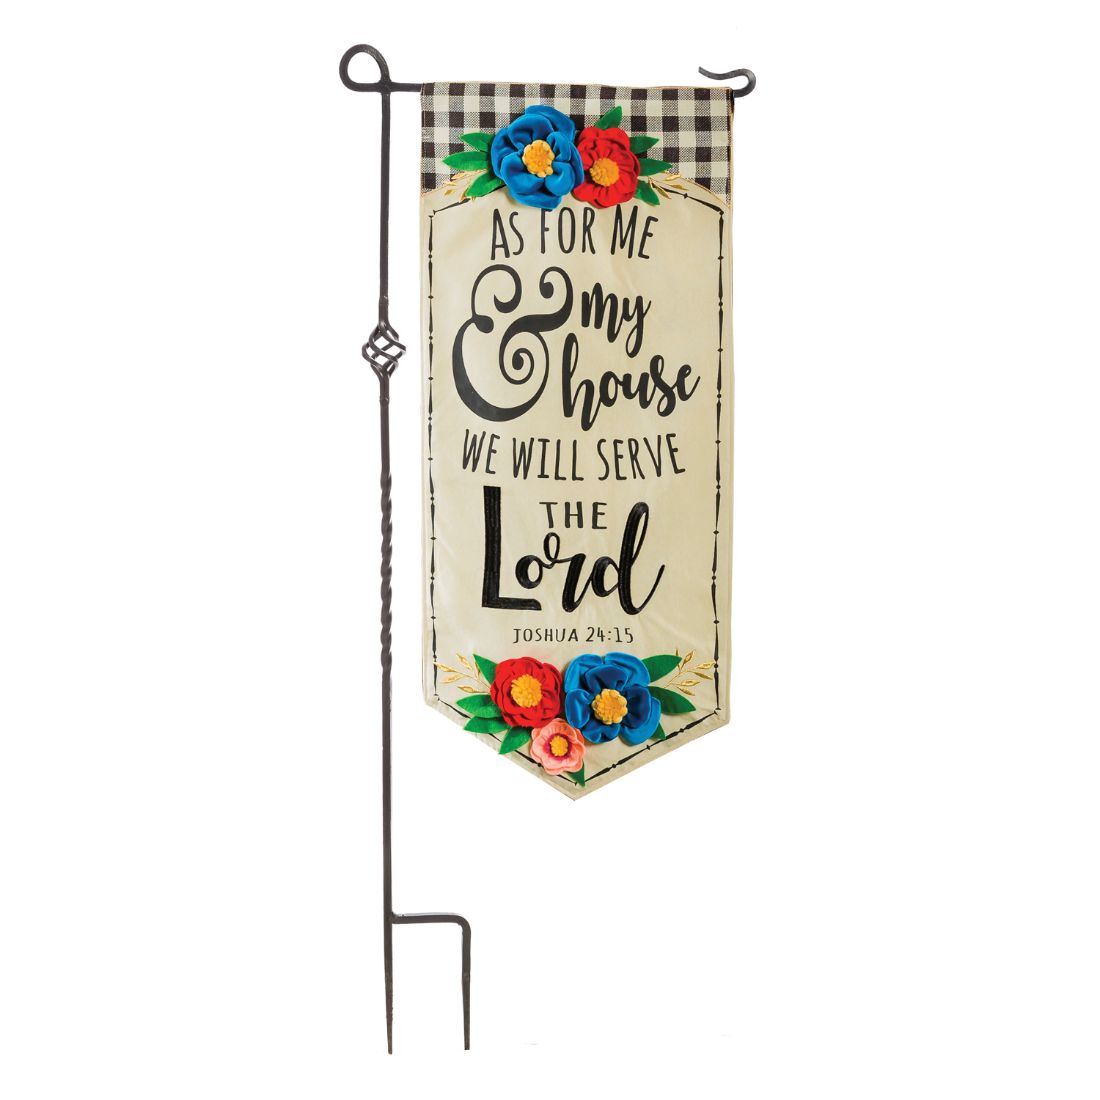 Me and My House Serve the Lord Everlasting Impressions Textile Decor